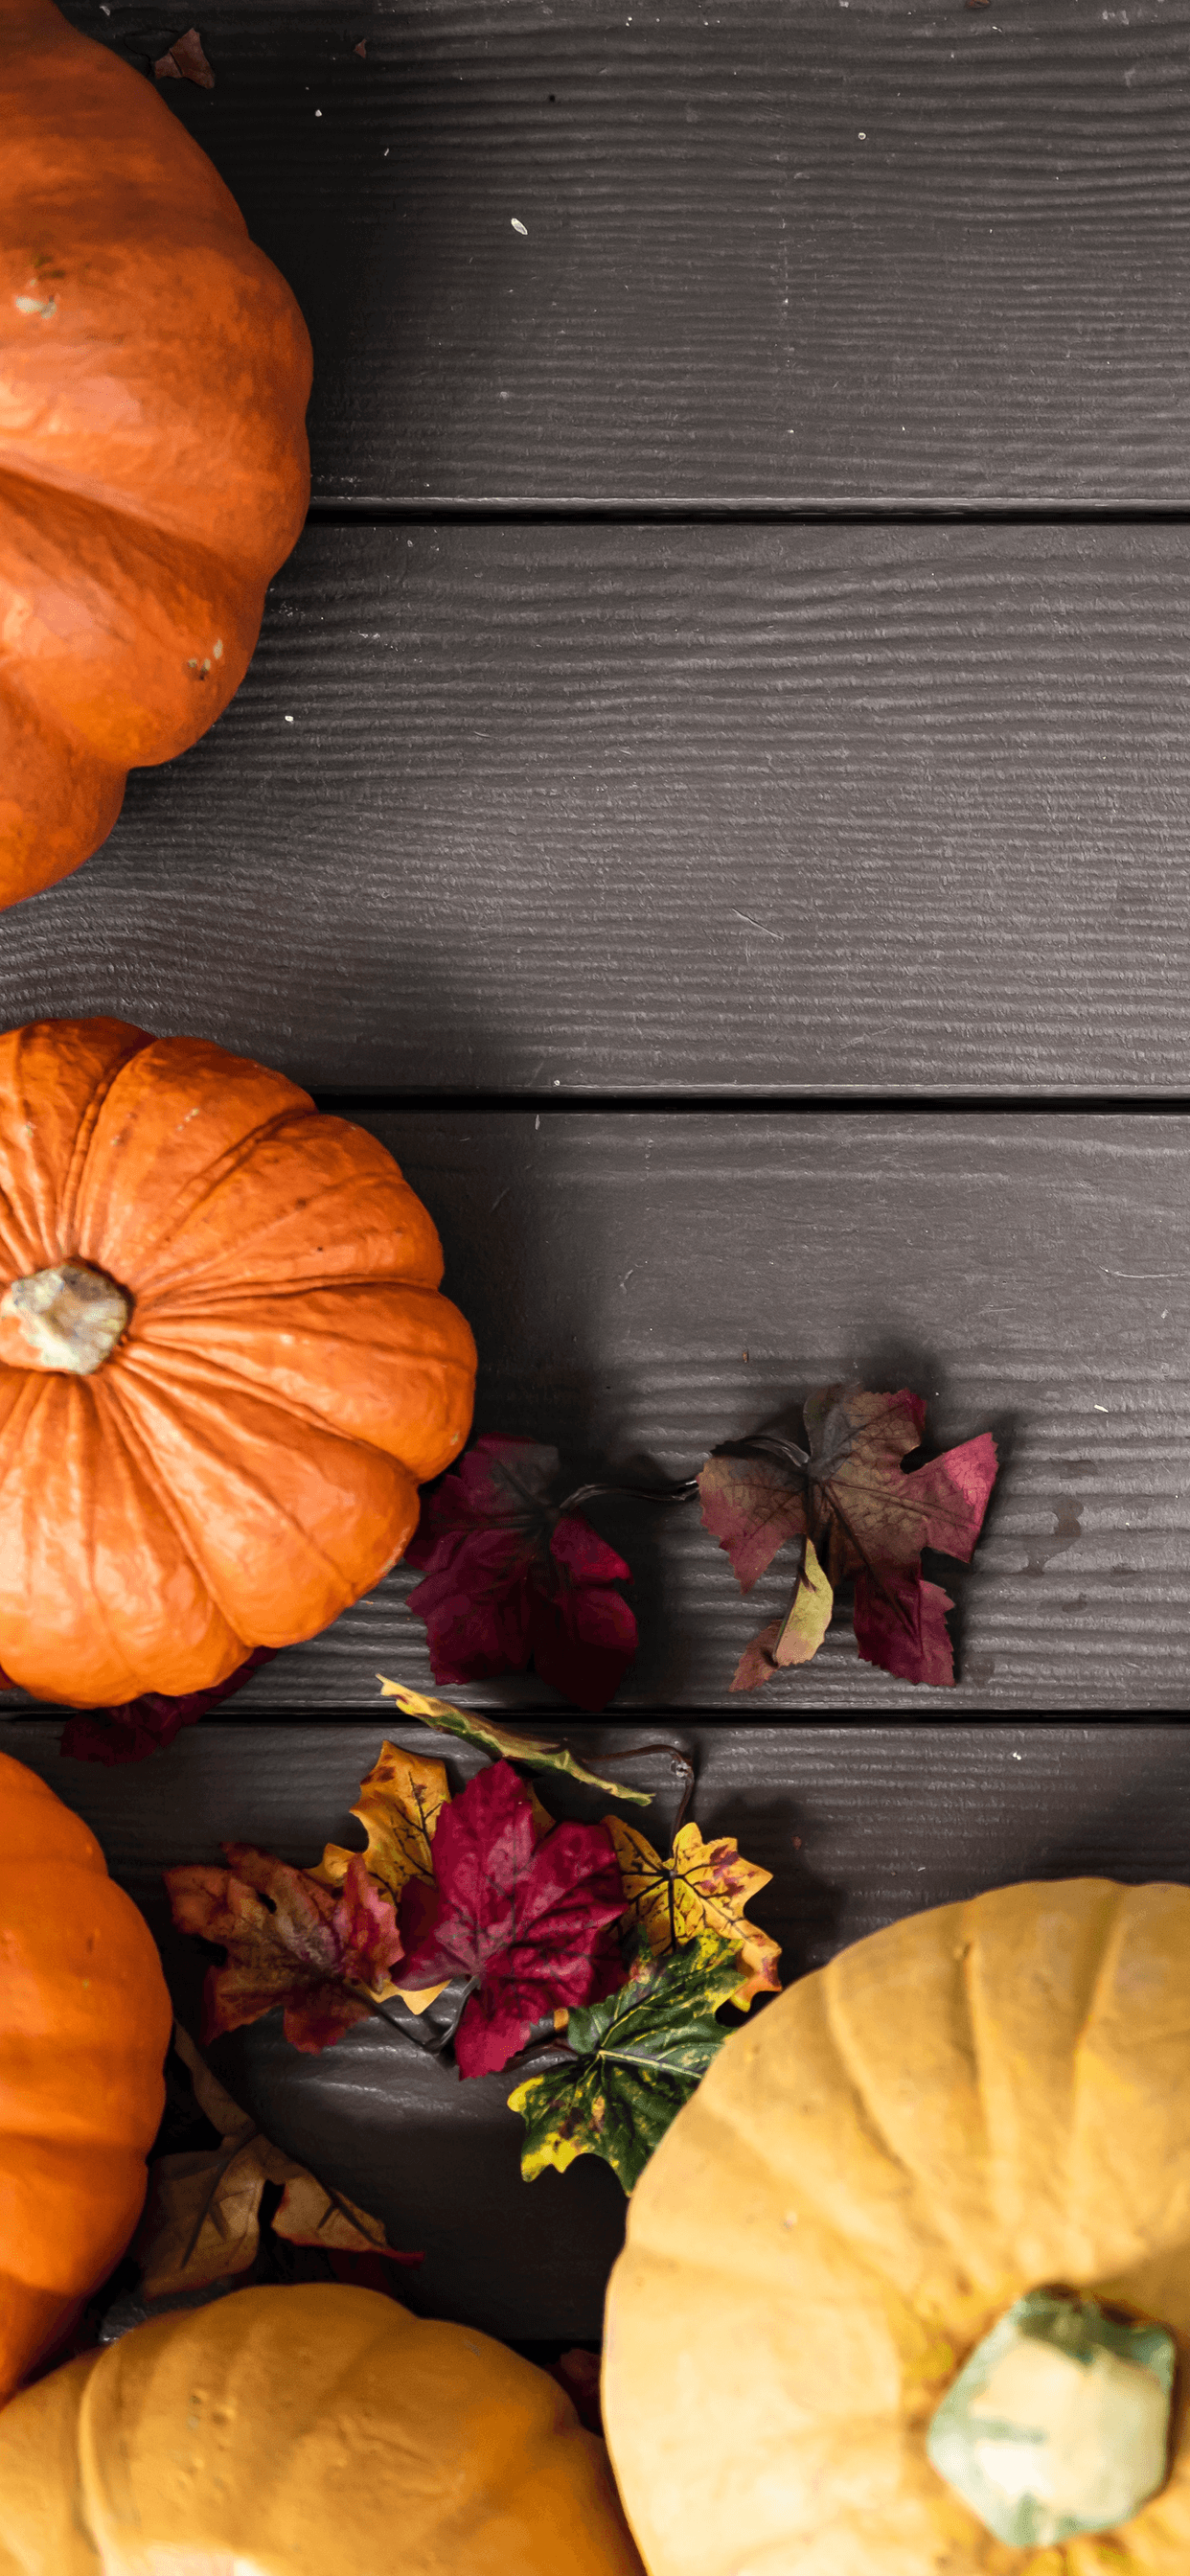 Download Pumpkin wallpapers for mobile phone free Pumpkin HD pictures